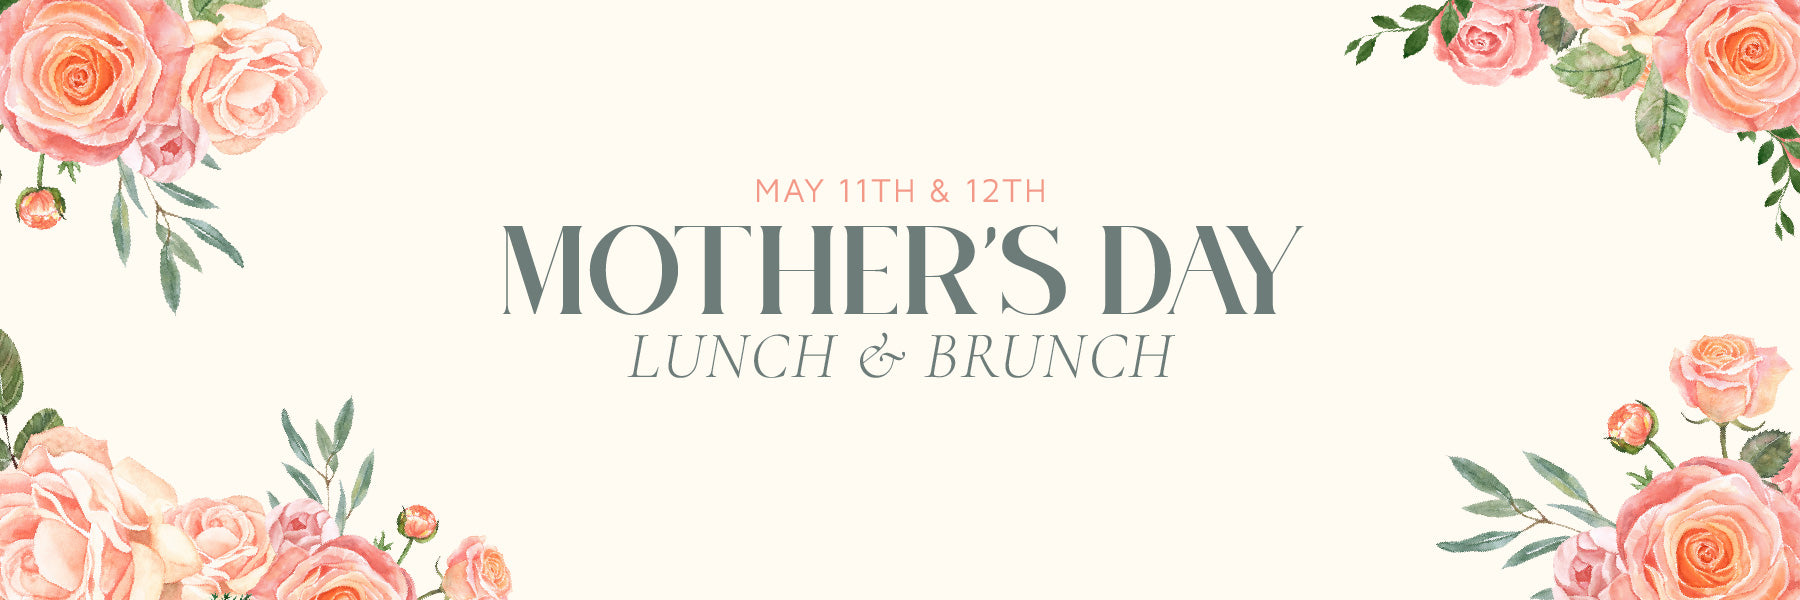 Mother's Day Brunch and Lunch. May 11th and 12th at The Tea House on Los Rios in San Juan Capistrano